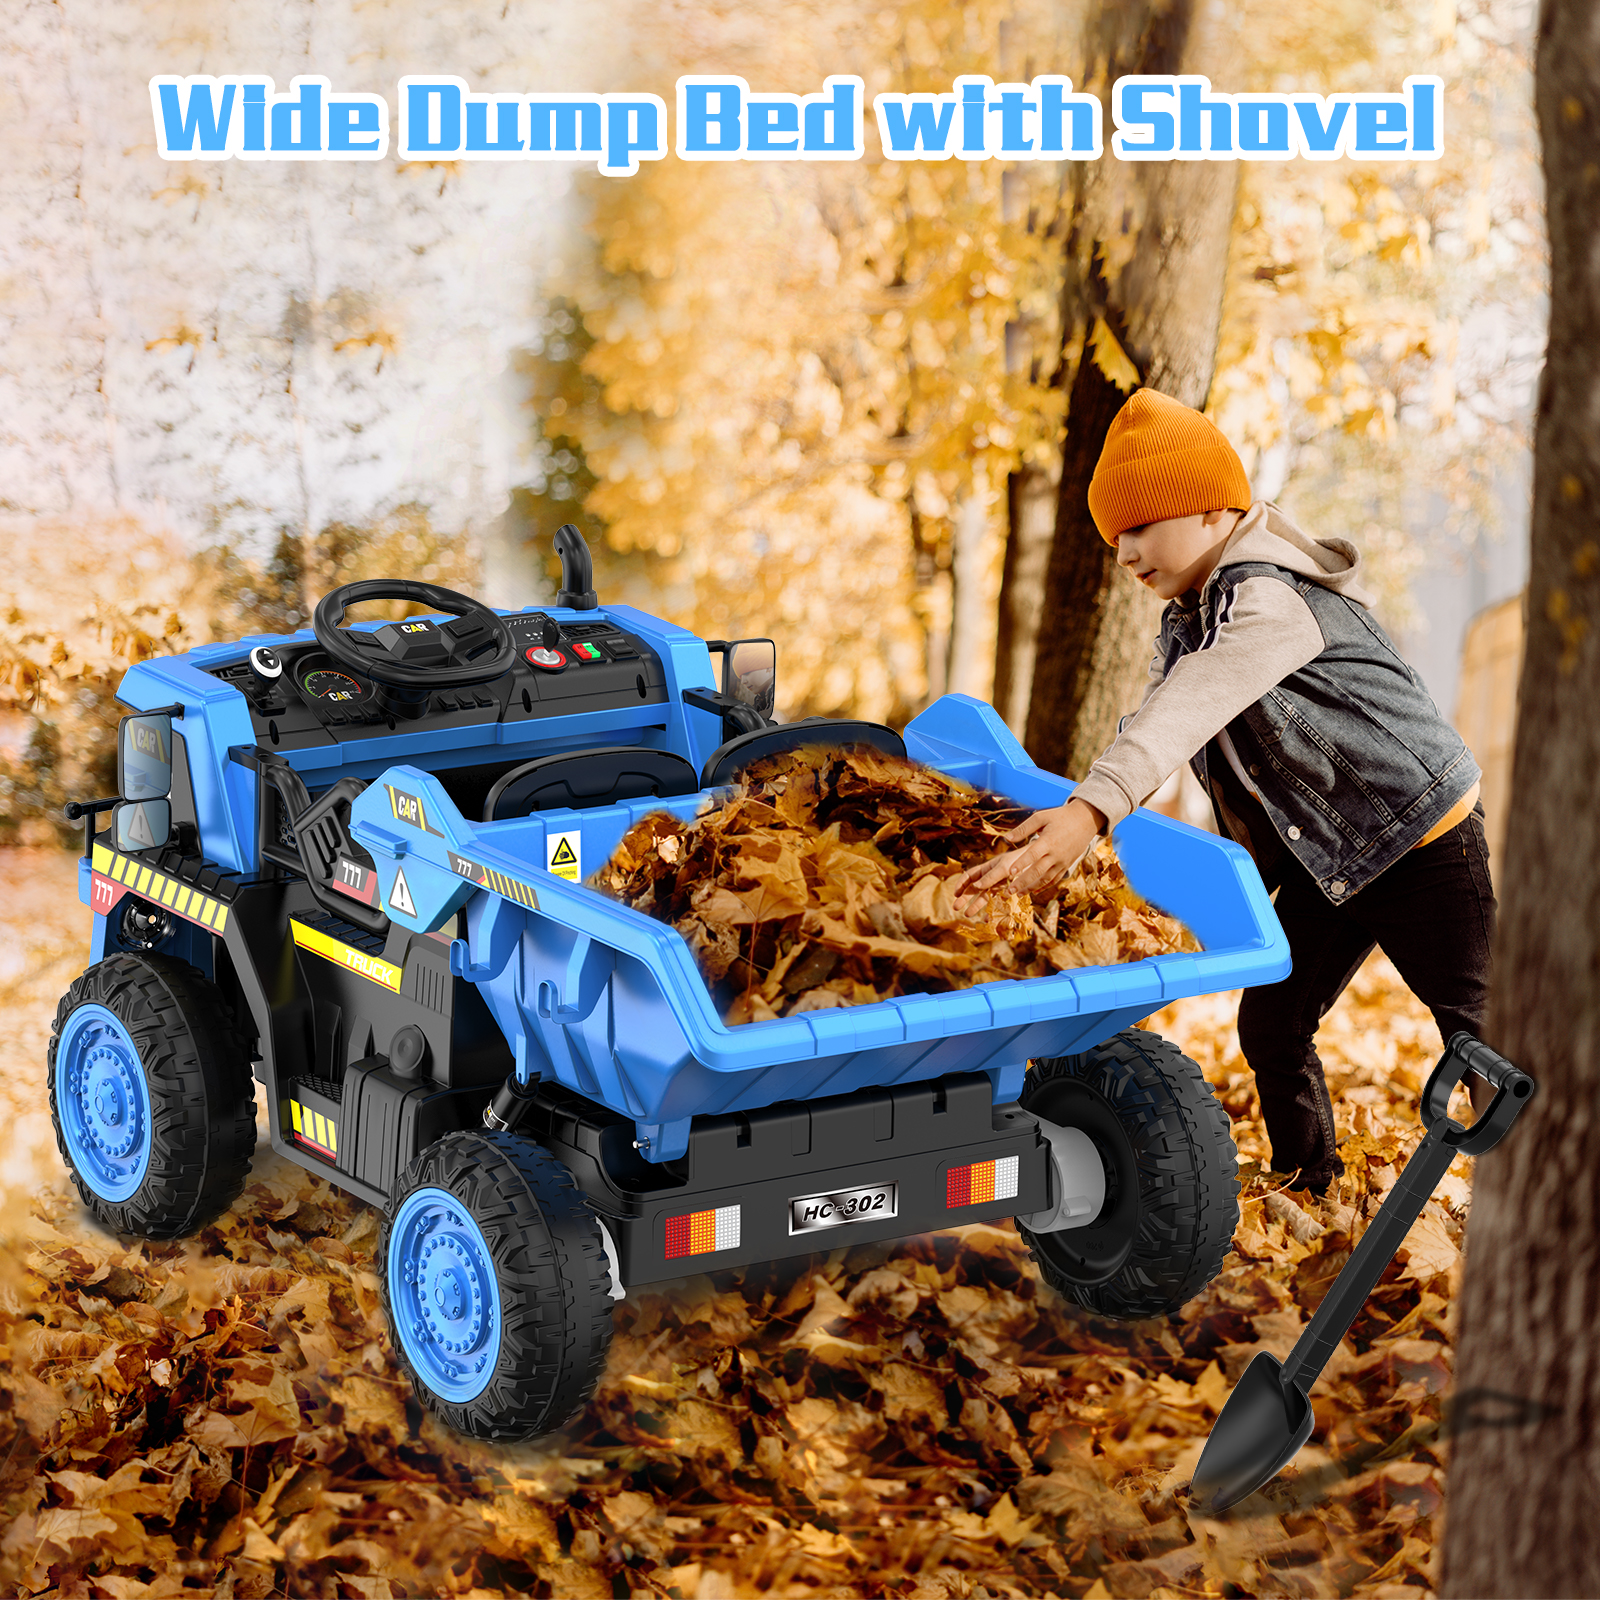 TOKTOO 12V Powered Ride on Dump Truck, Kid Electric Car with Remote Control, Music Player, Electric Dump Bed-Blue - image 4 of 13